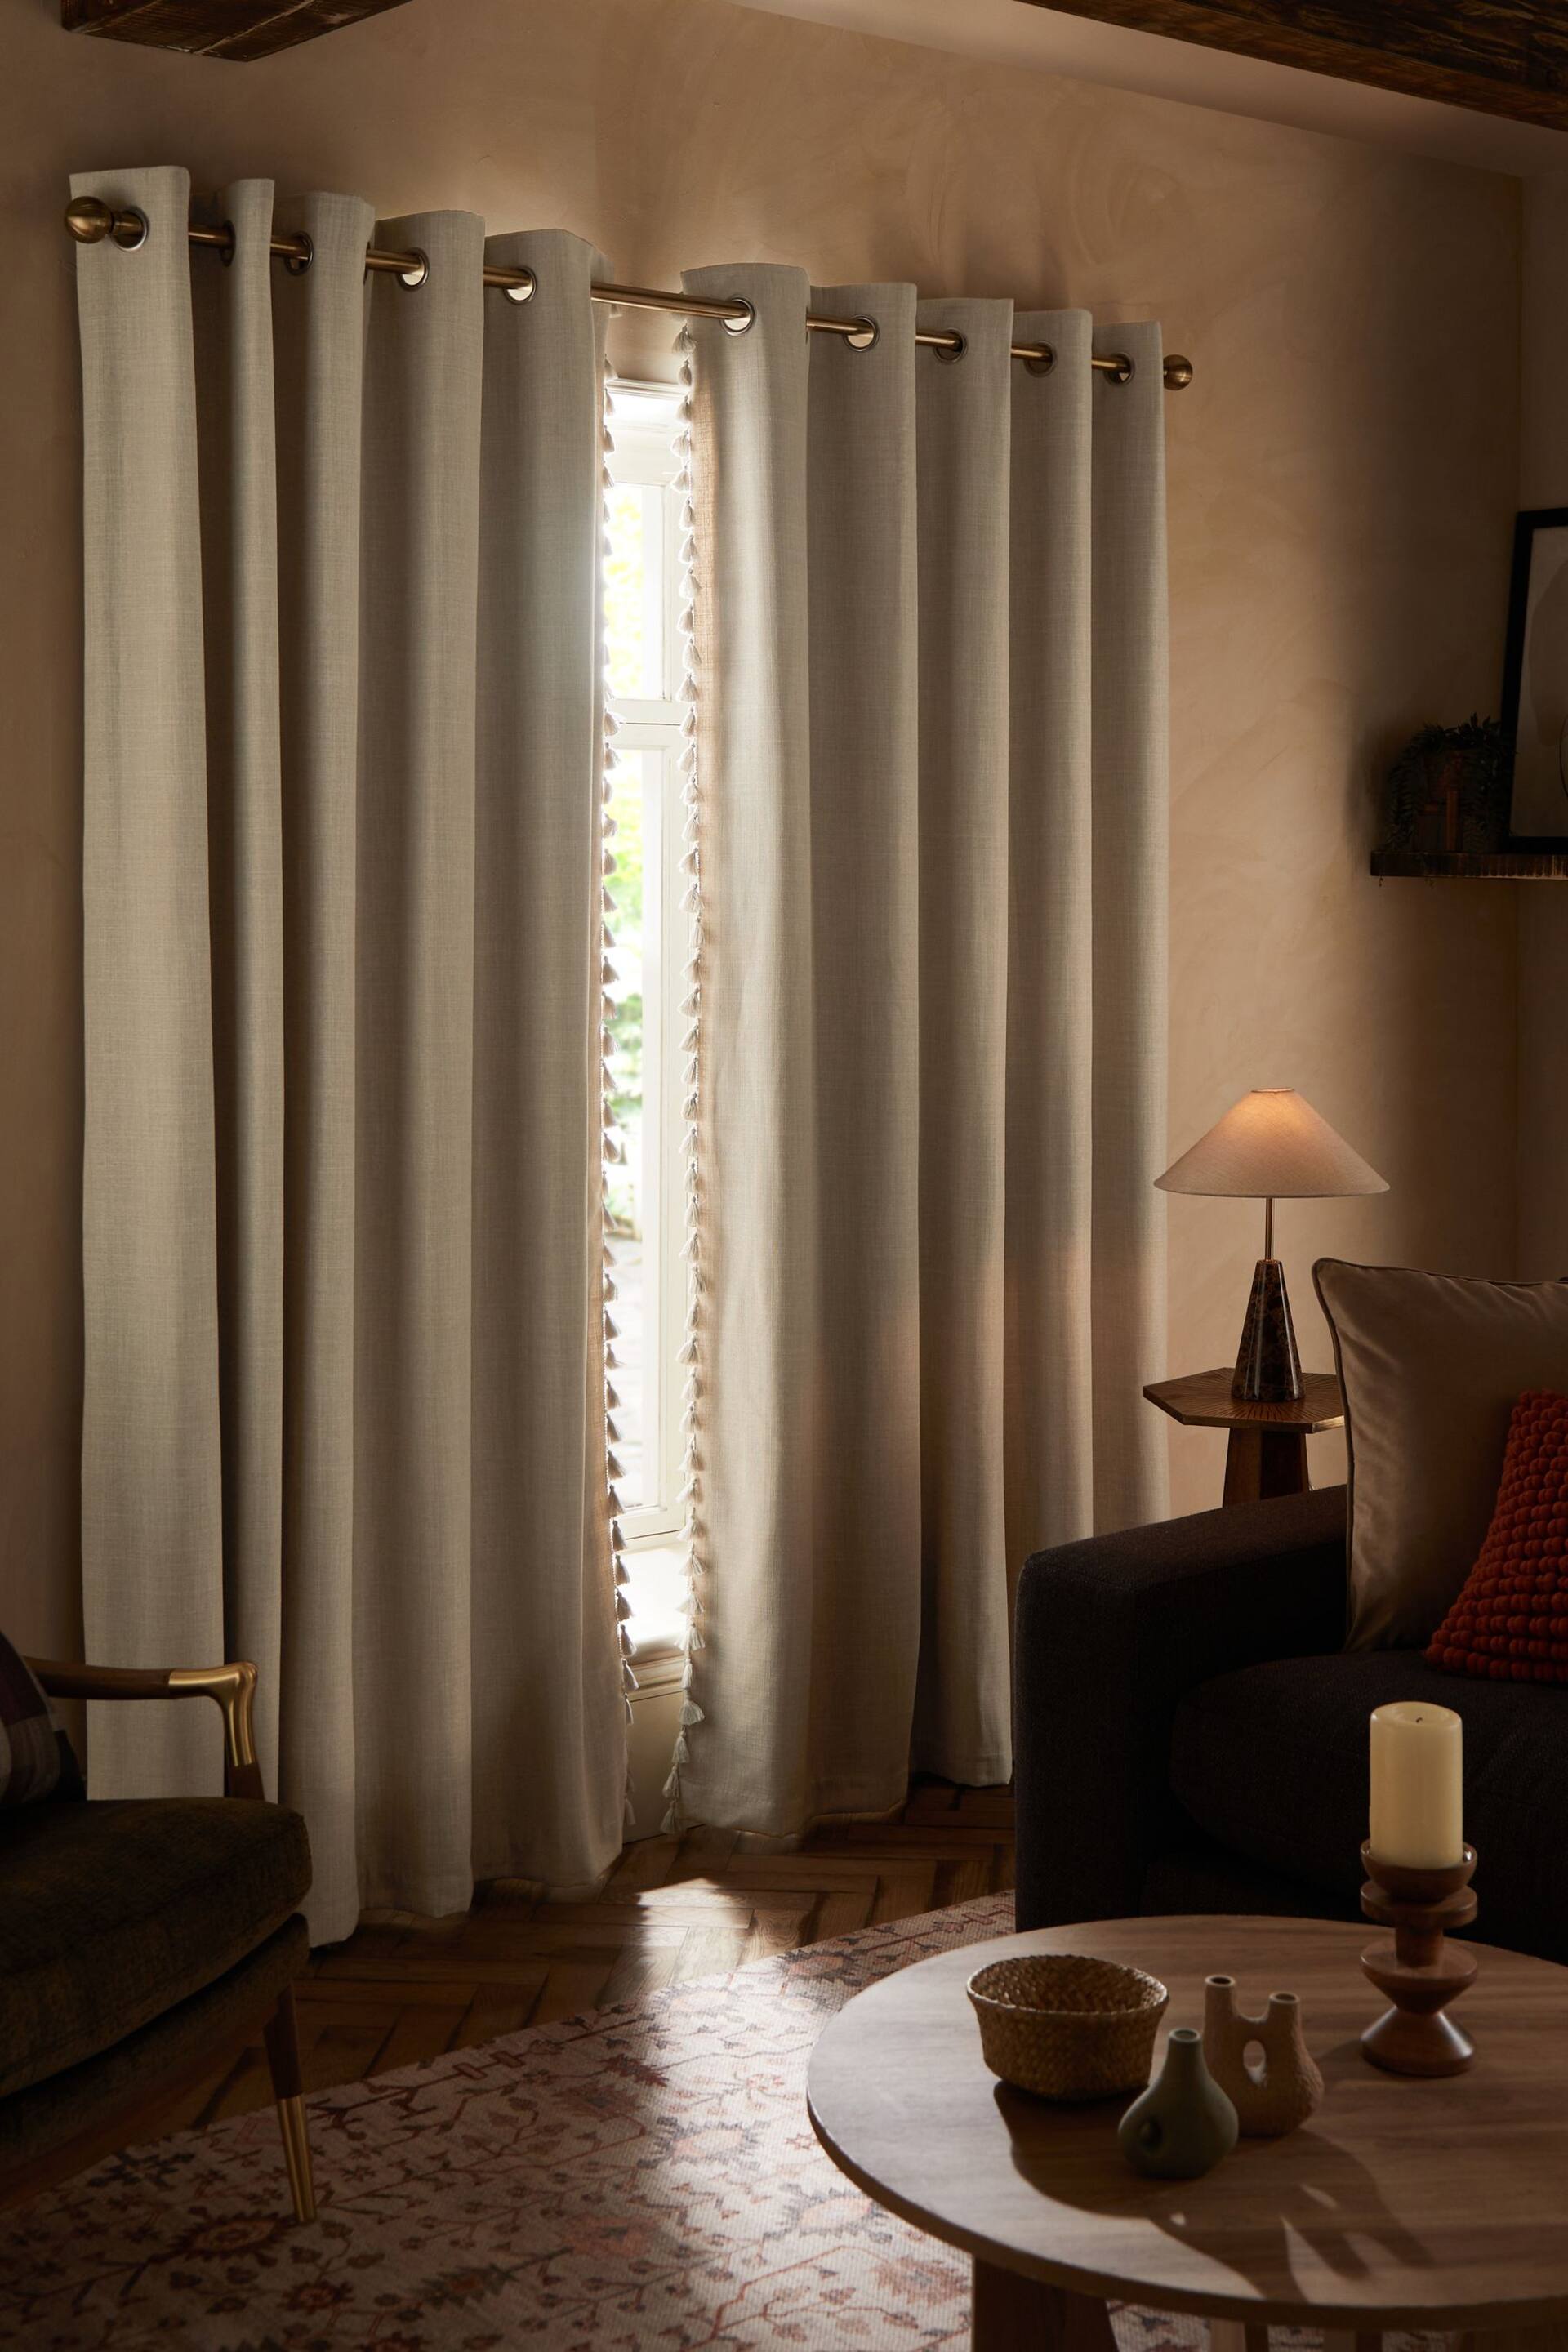 Light Natural Next Textured Tassel Edge Eyelet Blackout/Thermal Curtains - Image 4 of 7